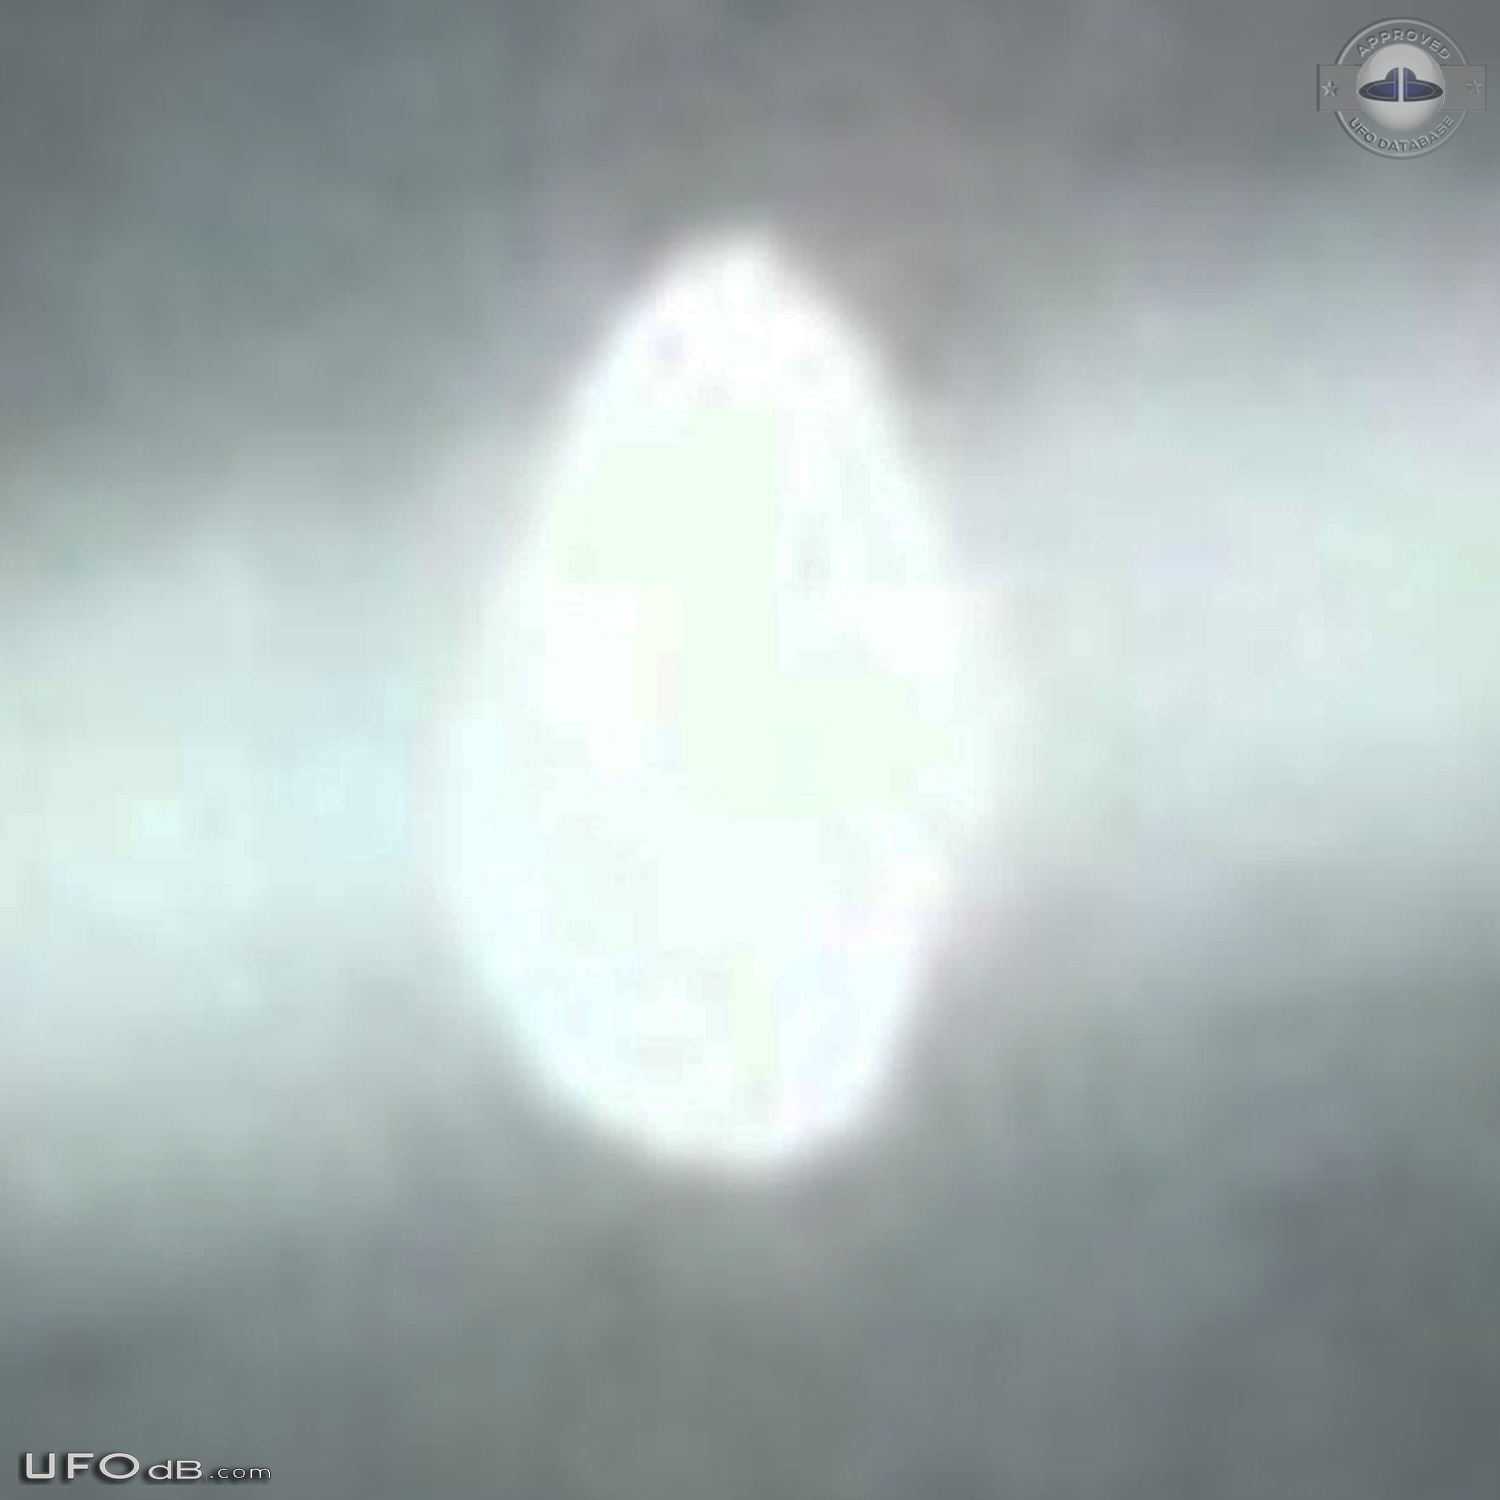 Bright Glowing Egg Shaped UFO over Bay of Plenty New Zealand 2012 UFO Picture #692-4